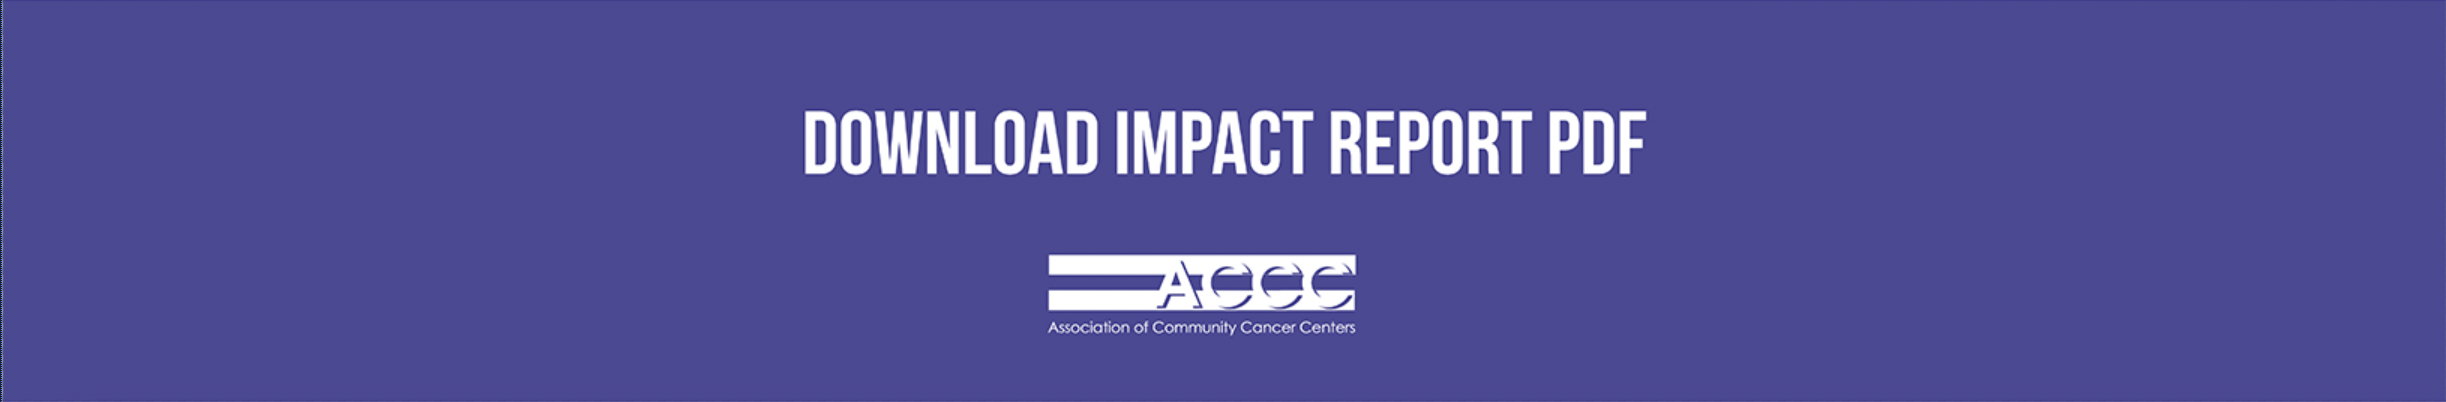 Download the Impact Report PDF